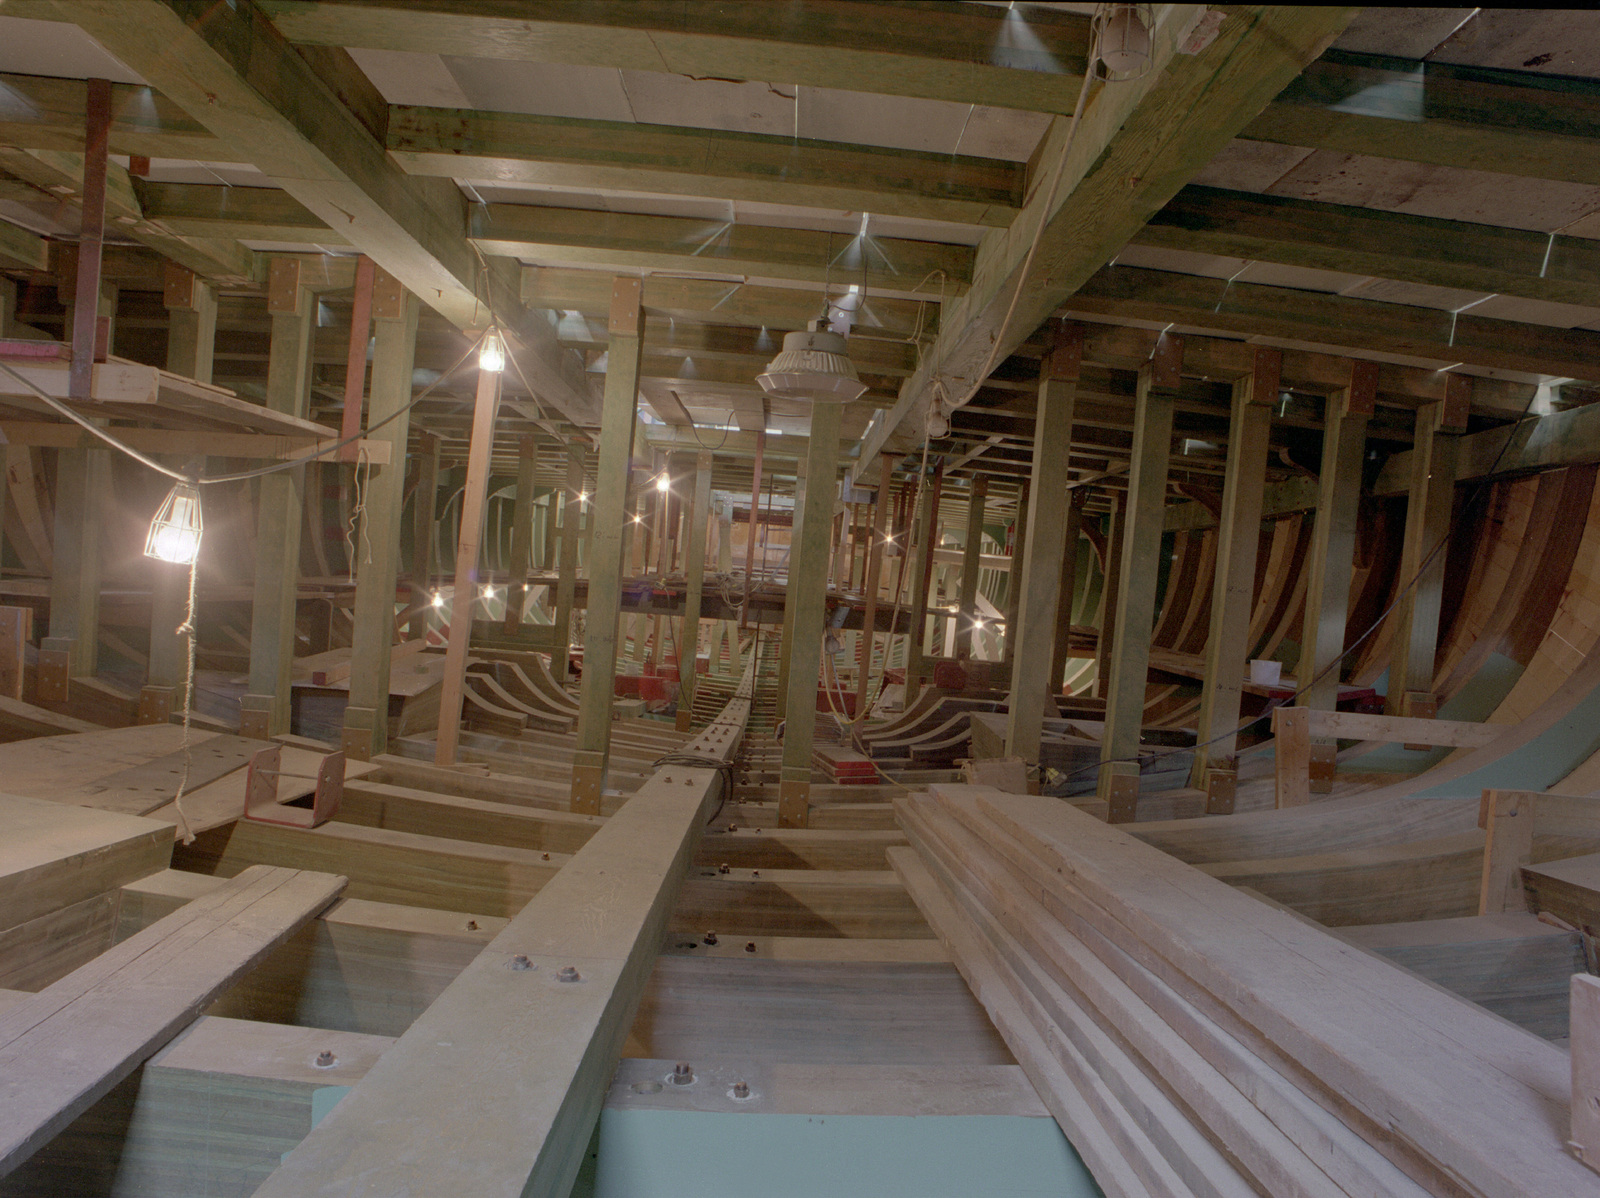 An Interior View Of The Wooden Framing At The Bottom Of The